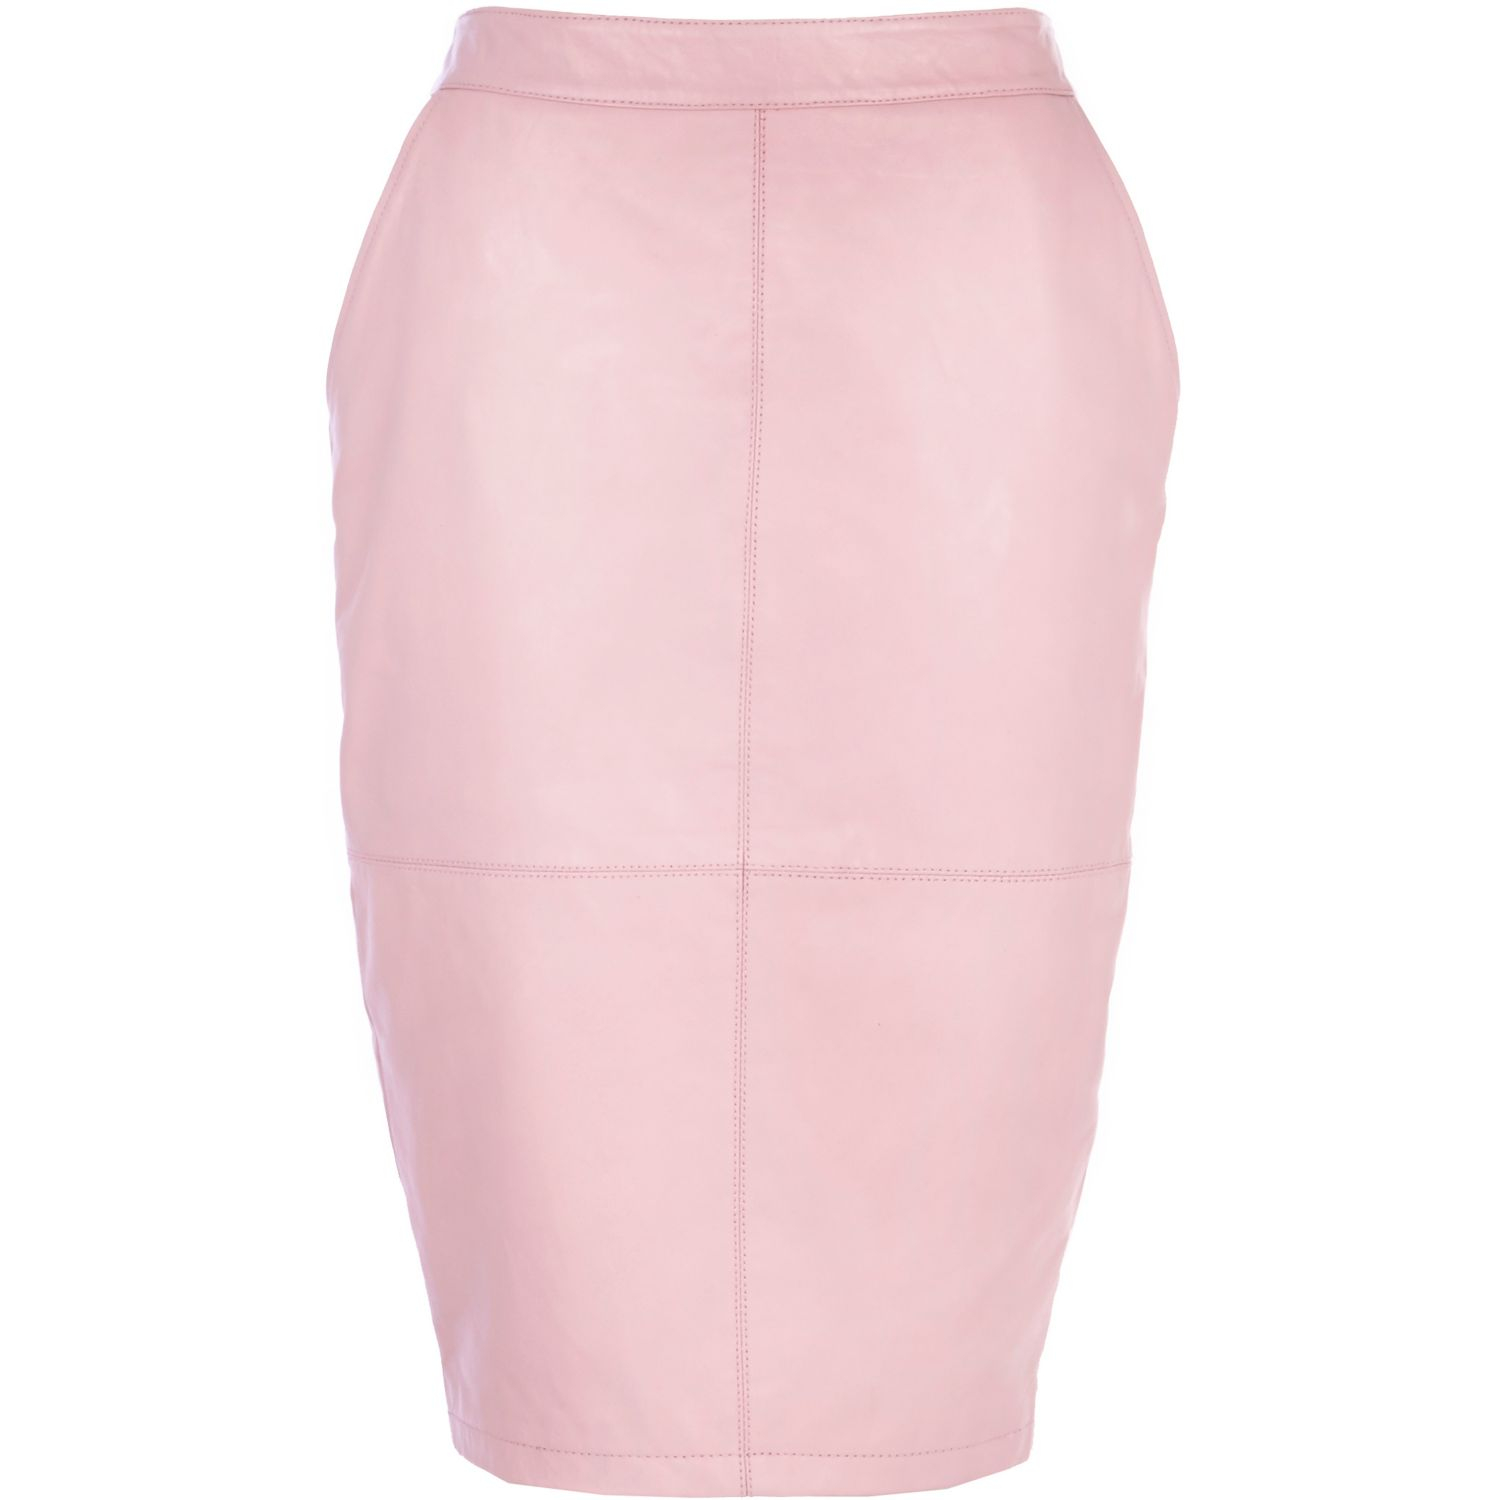 Light Pink Leather Pencil Skirt